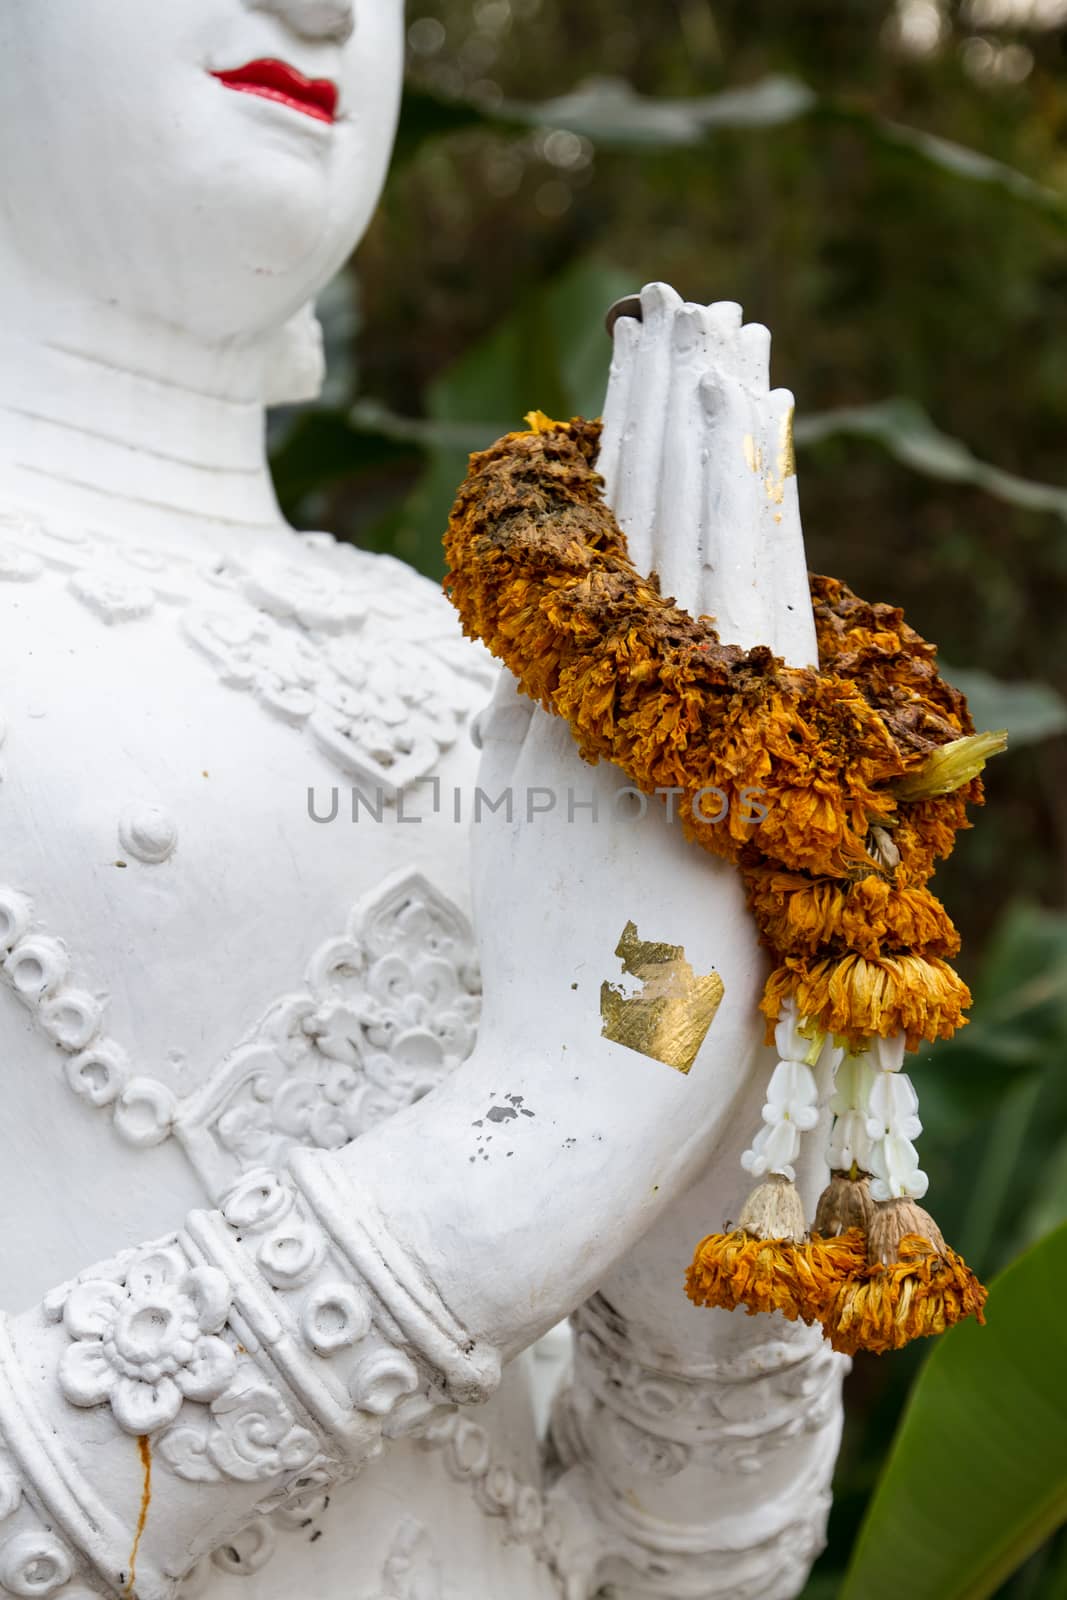 Praying hands of an antique statue with wreath around hands